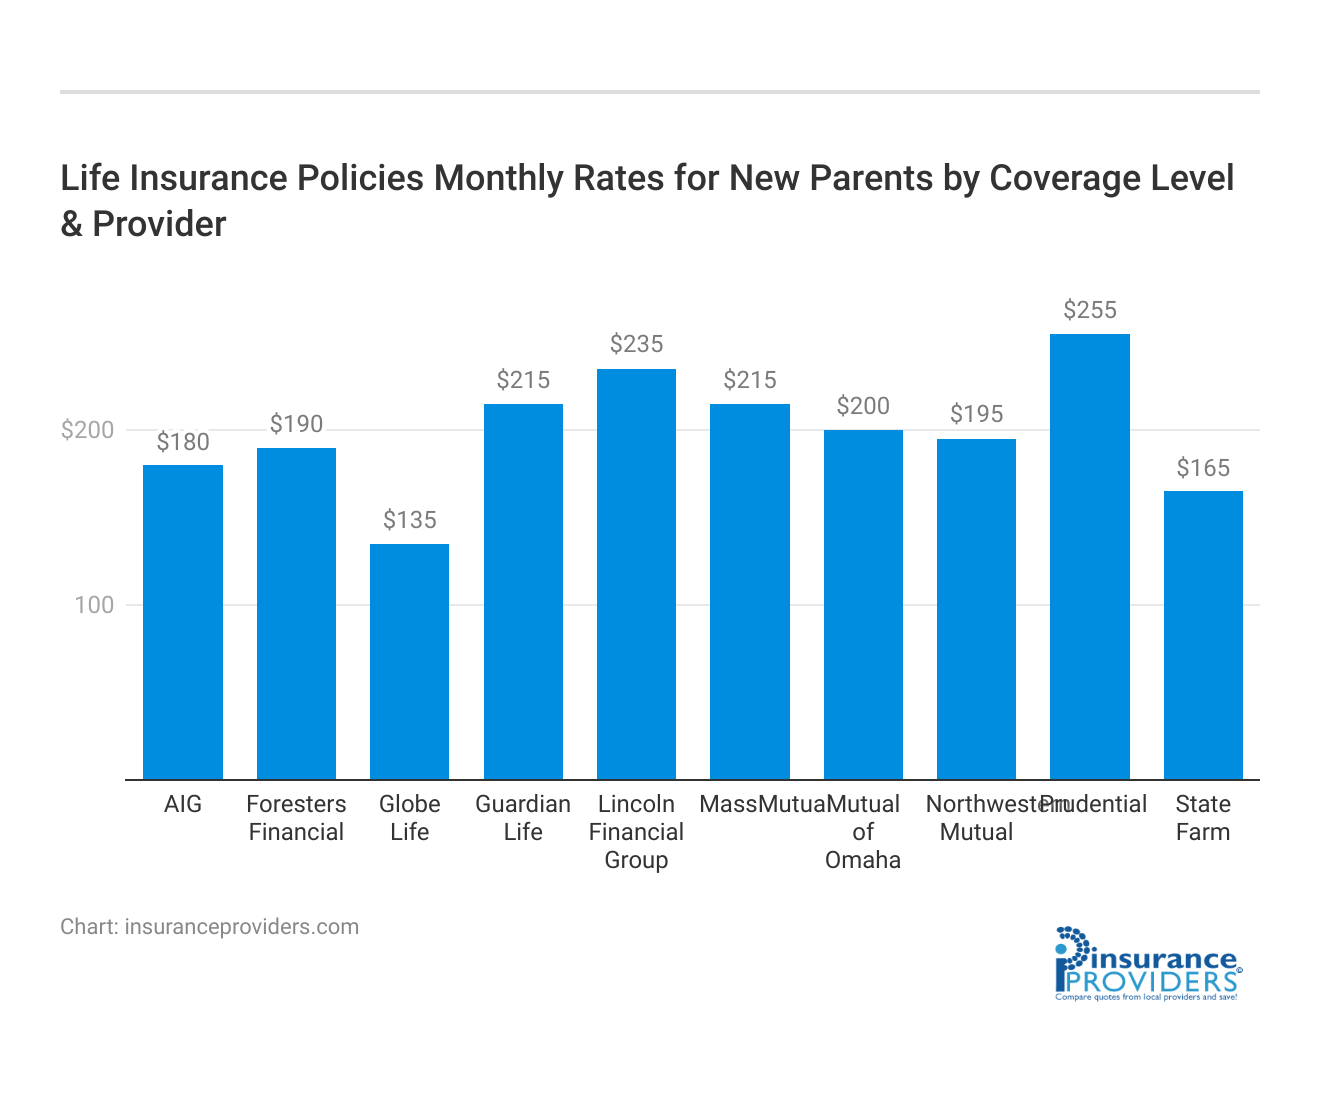 <h3>Life Insurance Policies Monthly Rates for New Parents by Coverage Level & Provider</h3>